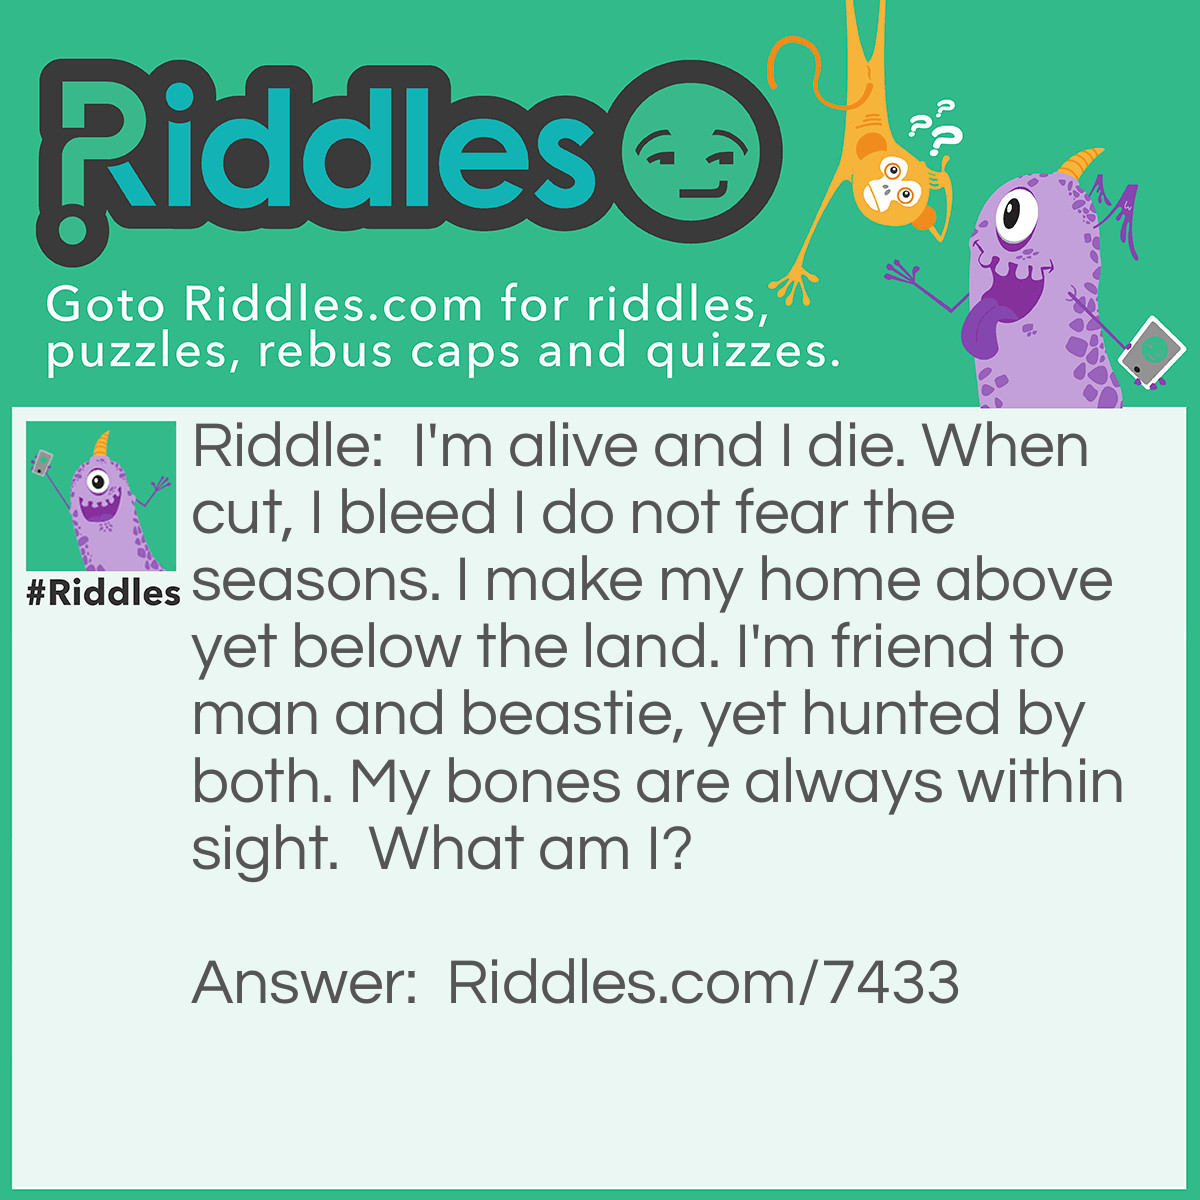 Riddle: I'm alive and I die. When cut, I bleed I do not fear the seasons. I make my home above yet below the land. I'm a friend to man and beastie, yet hunted by both. My bones are always within sight. 
What am I? Answer: A Tree.